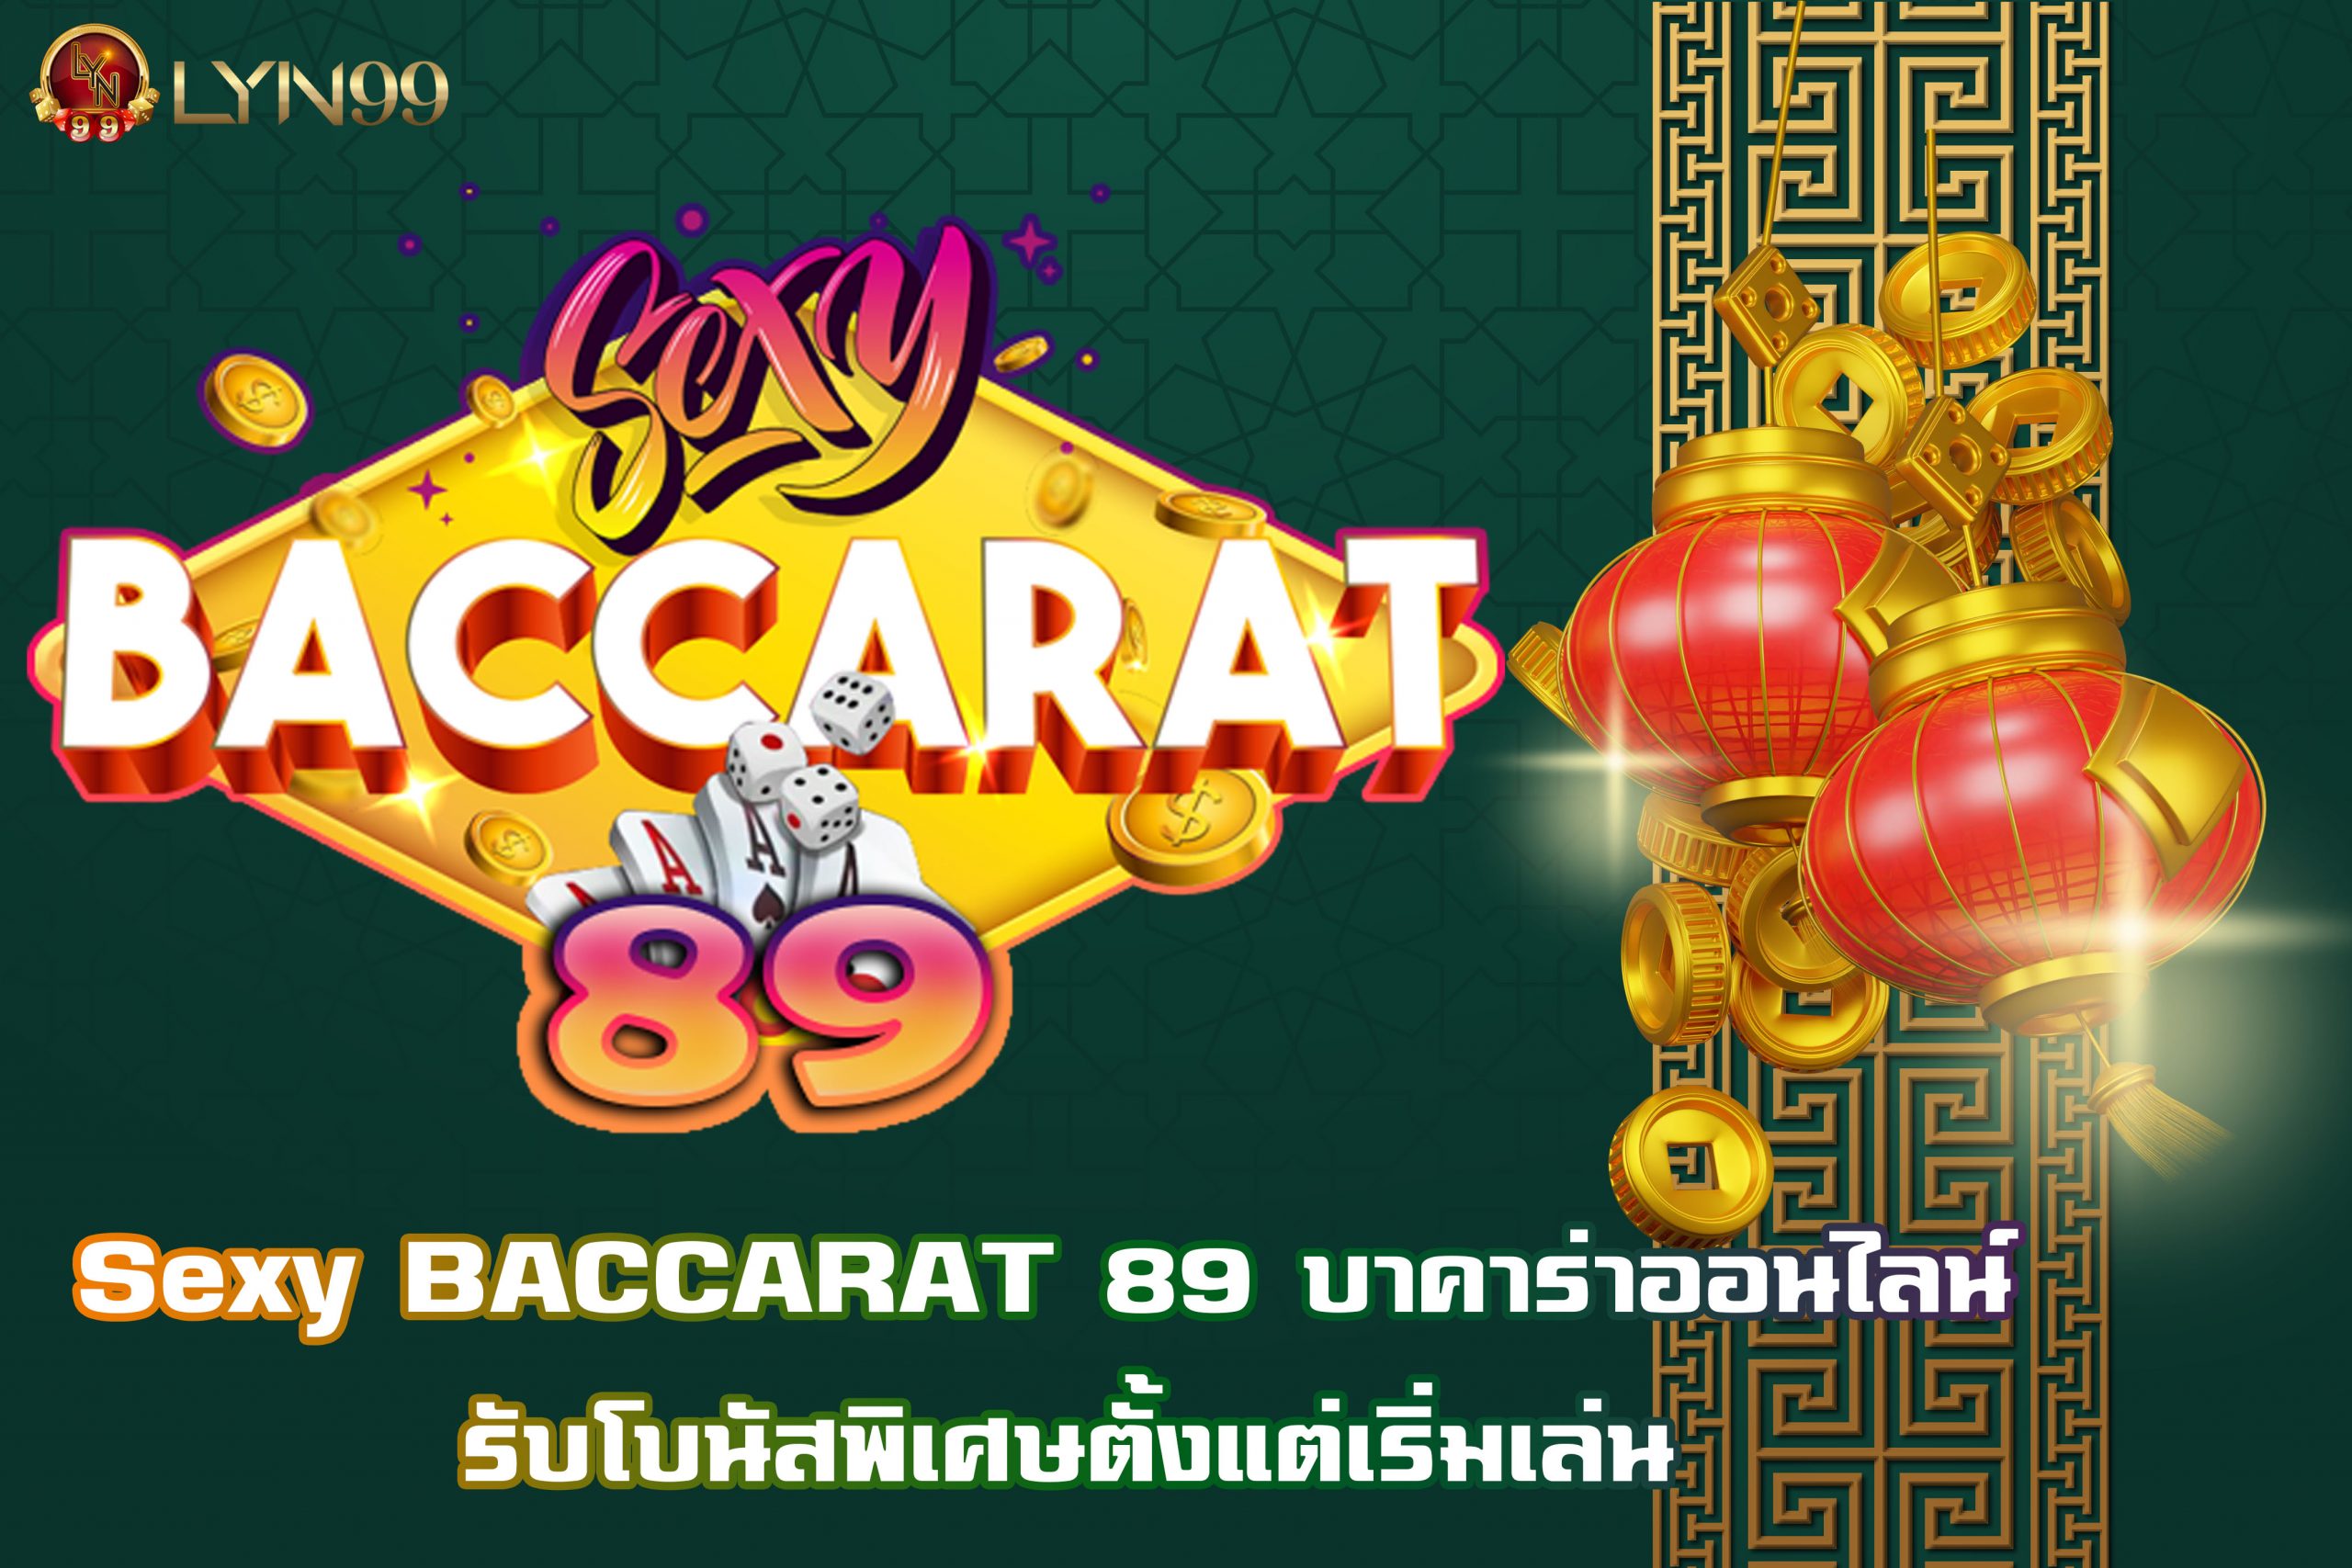 Sexy BACCARAT 89